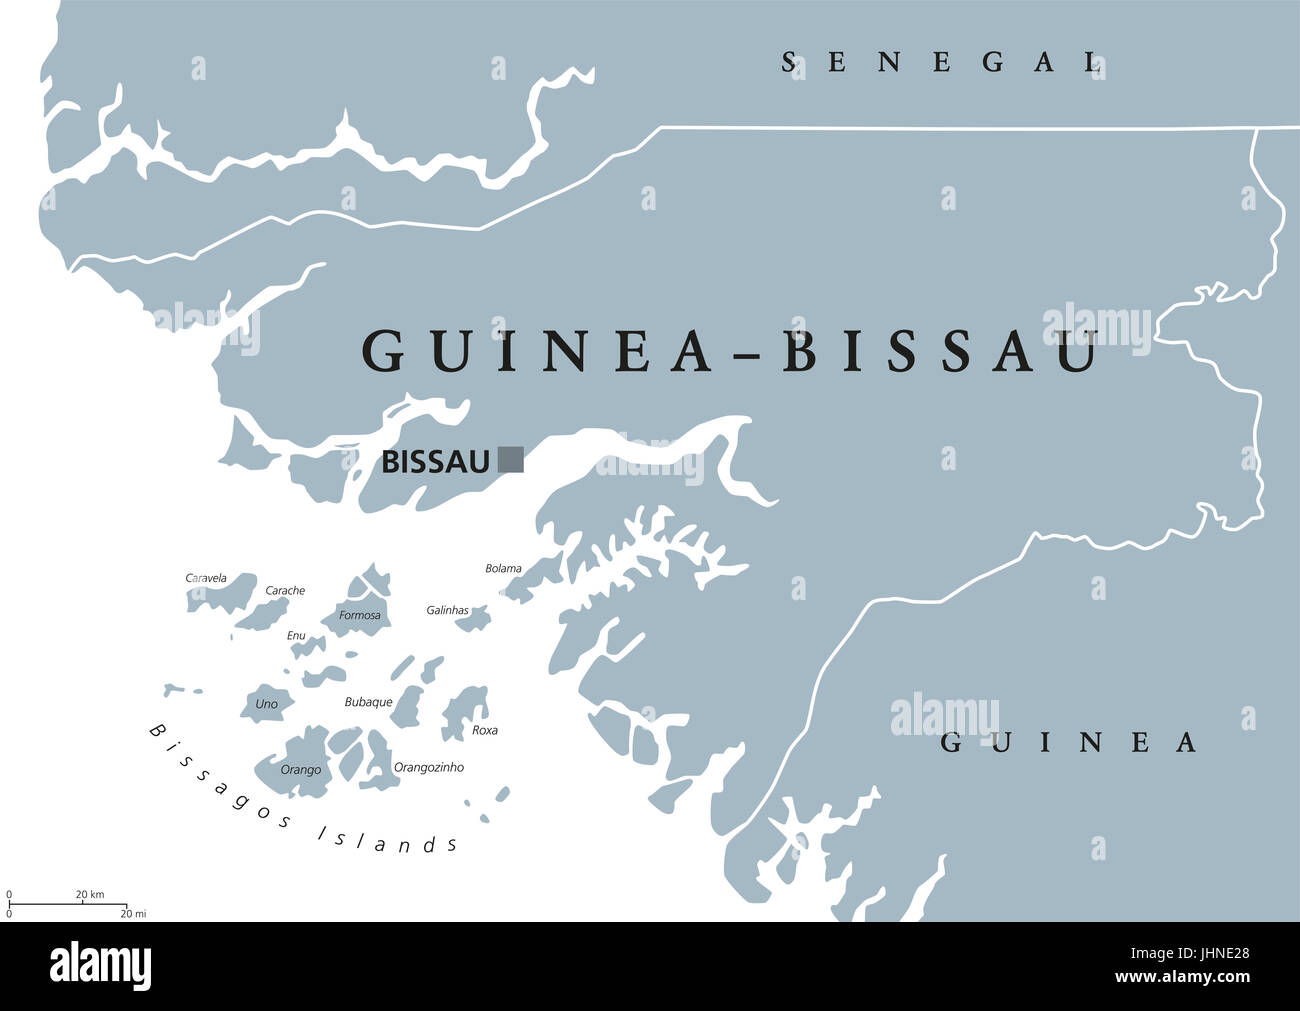 Guinea-Bissau political map with capital Bissau, international borders and neighbors. Republic and country in West Africa. Gray illustration. Stock Photo